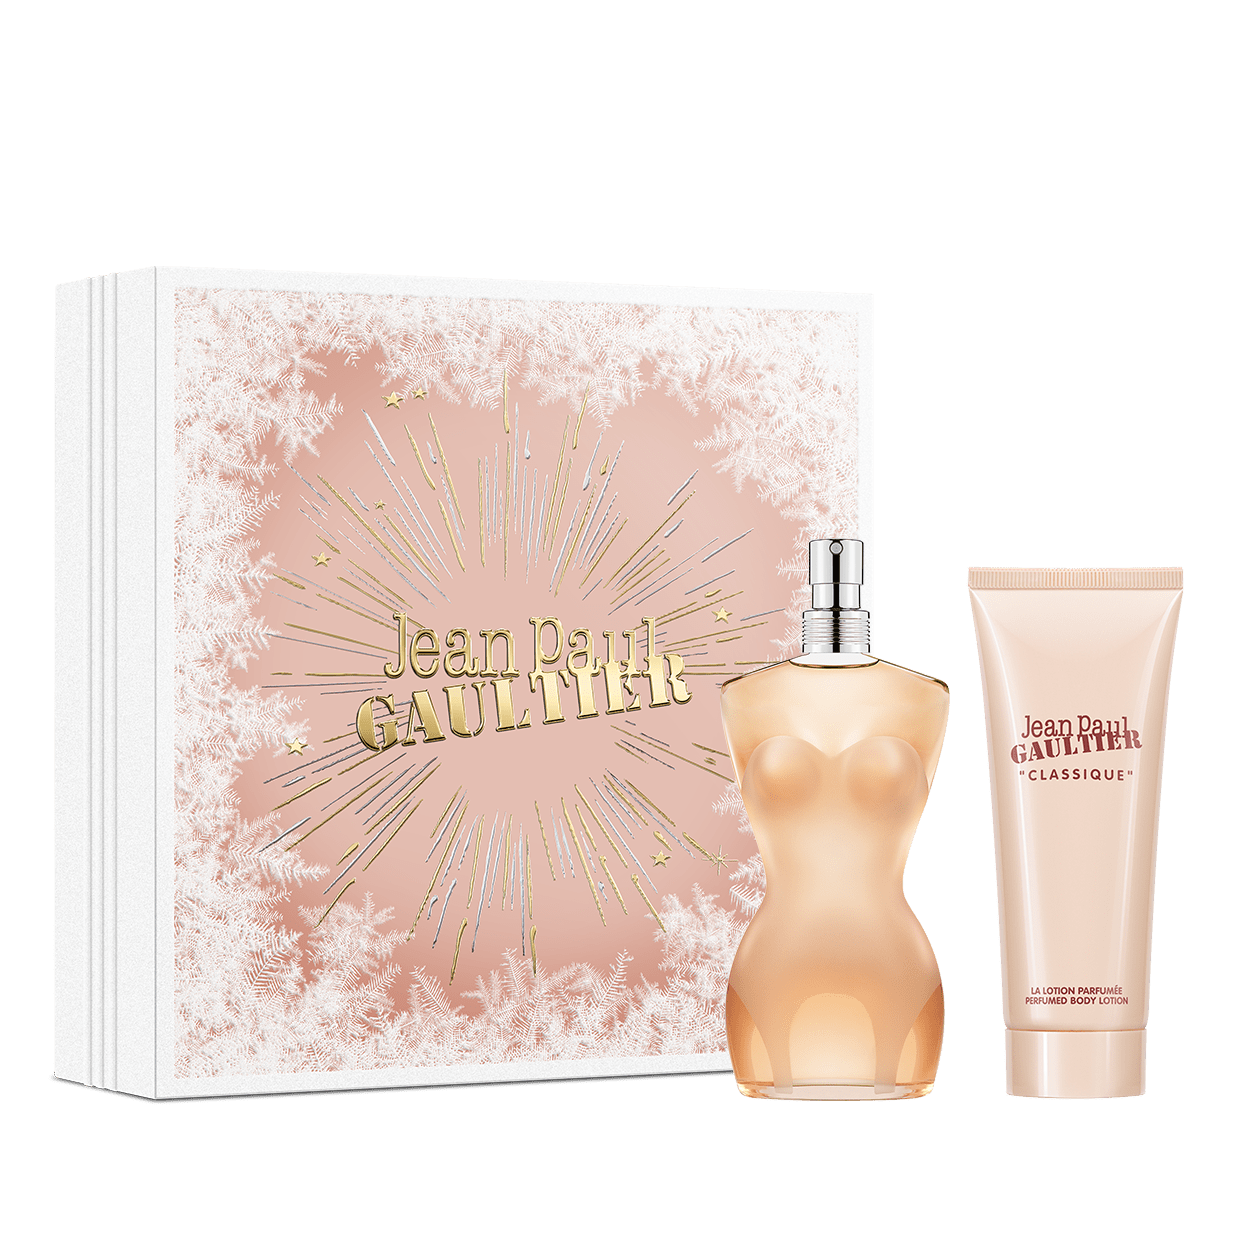 Classique 50 ml and Body lotion 75 ml